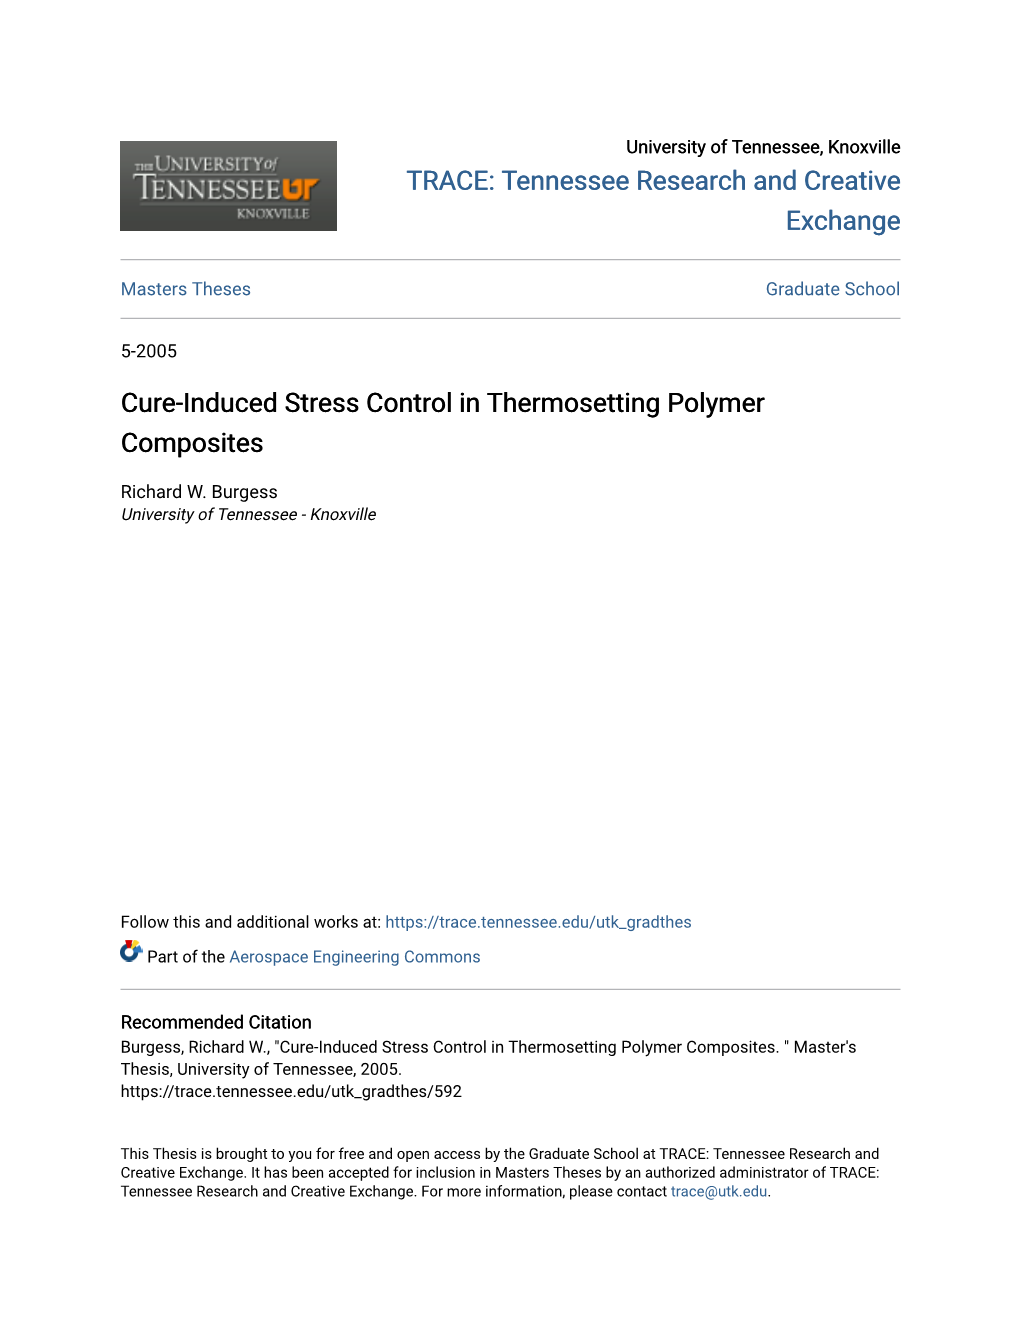 Cure-Induced Stress Control in Thermosetting Polymer Composites